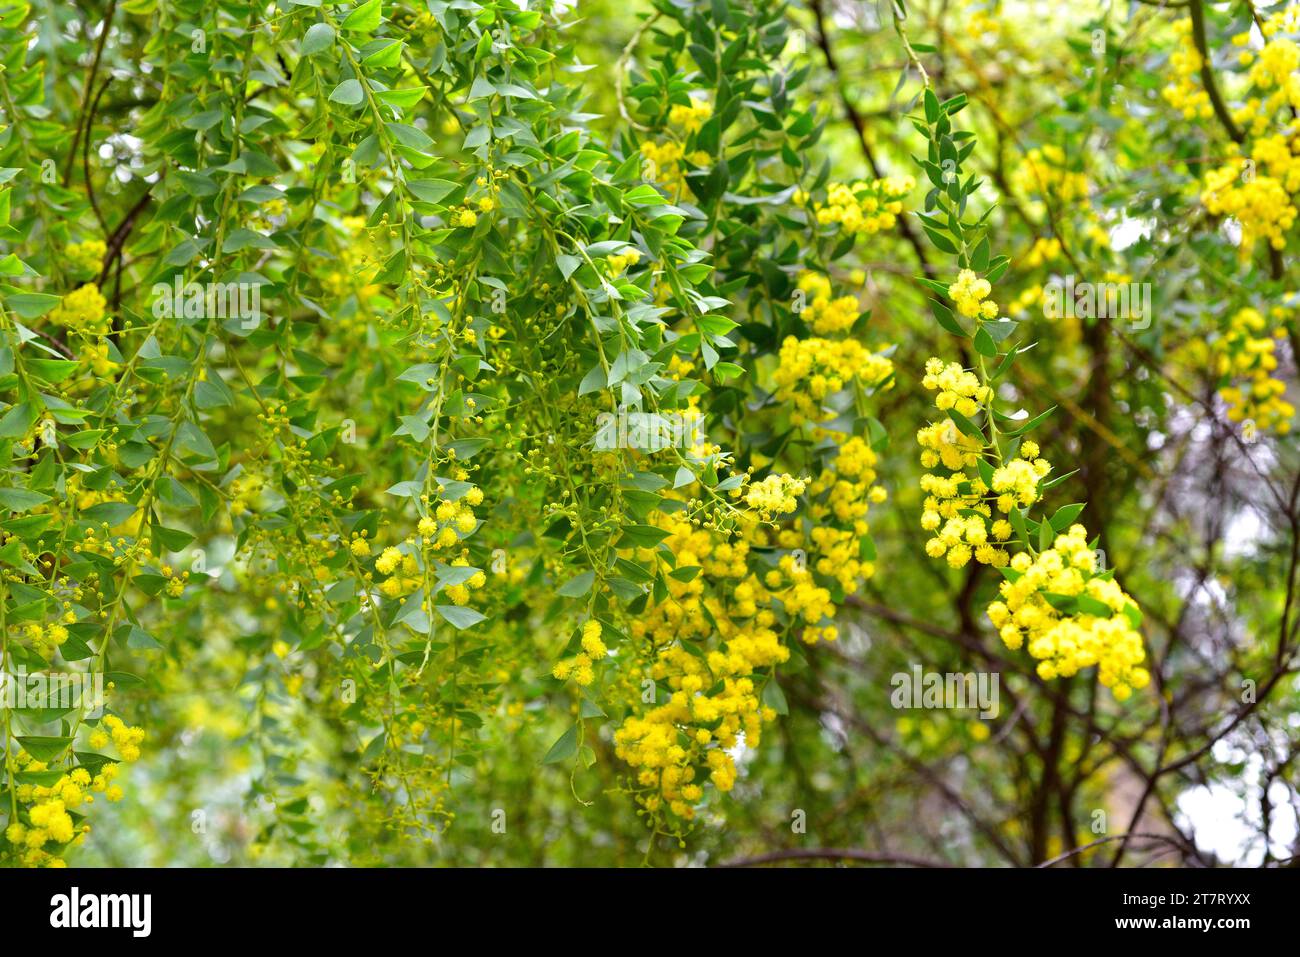 Knife-leaf wattle (Acacia cultriformis) is an evergreen tree native to eastern Australia. Flowers and leaves detail. Stock Photo